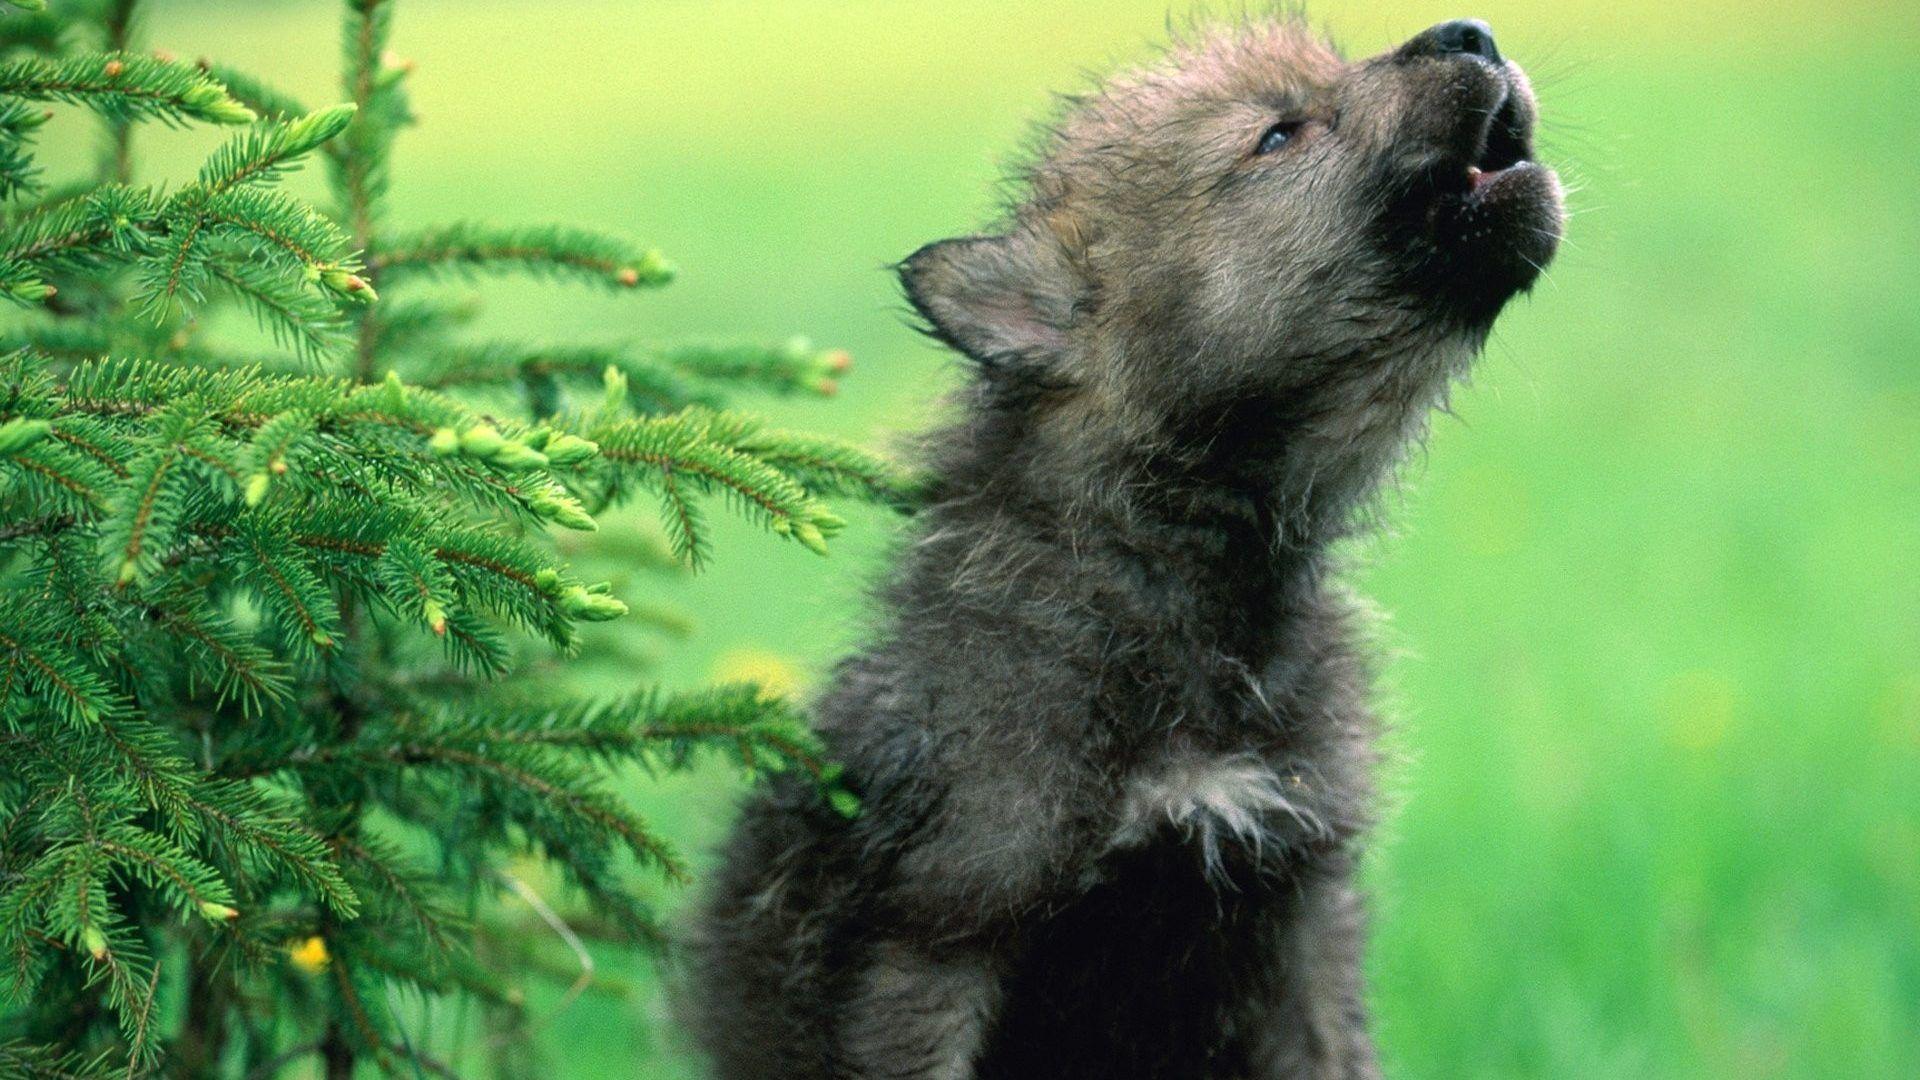 Howling Tag wallpaper: Predator Gray Wolf Snout Howling Dogs Full